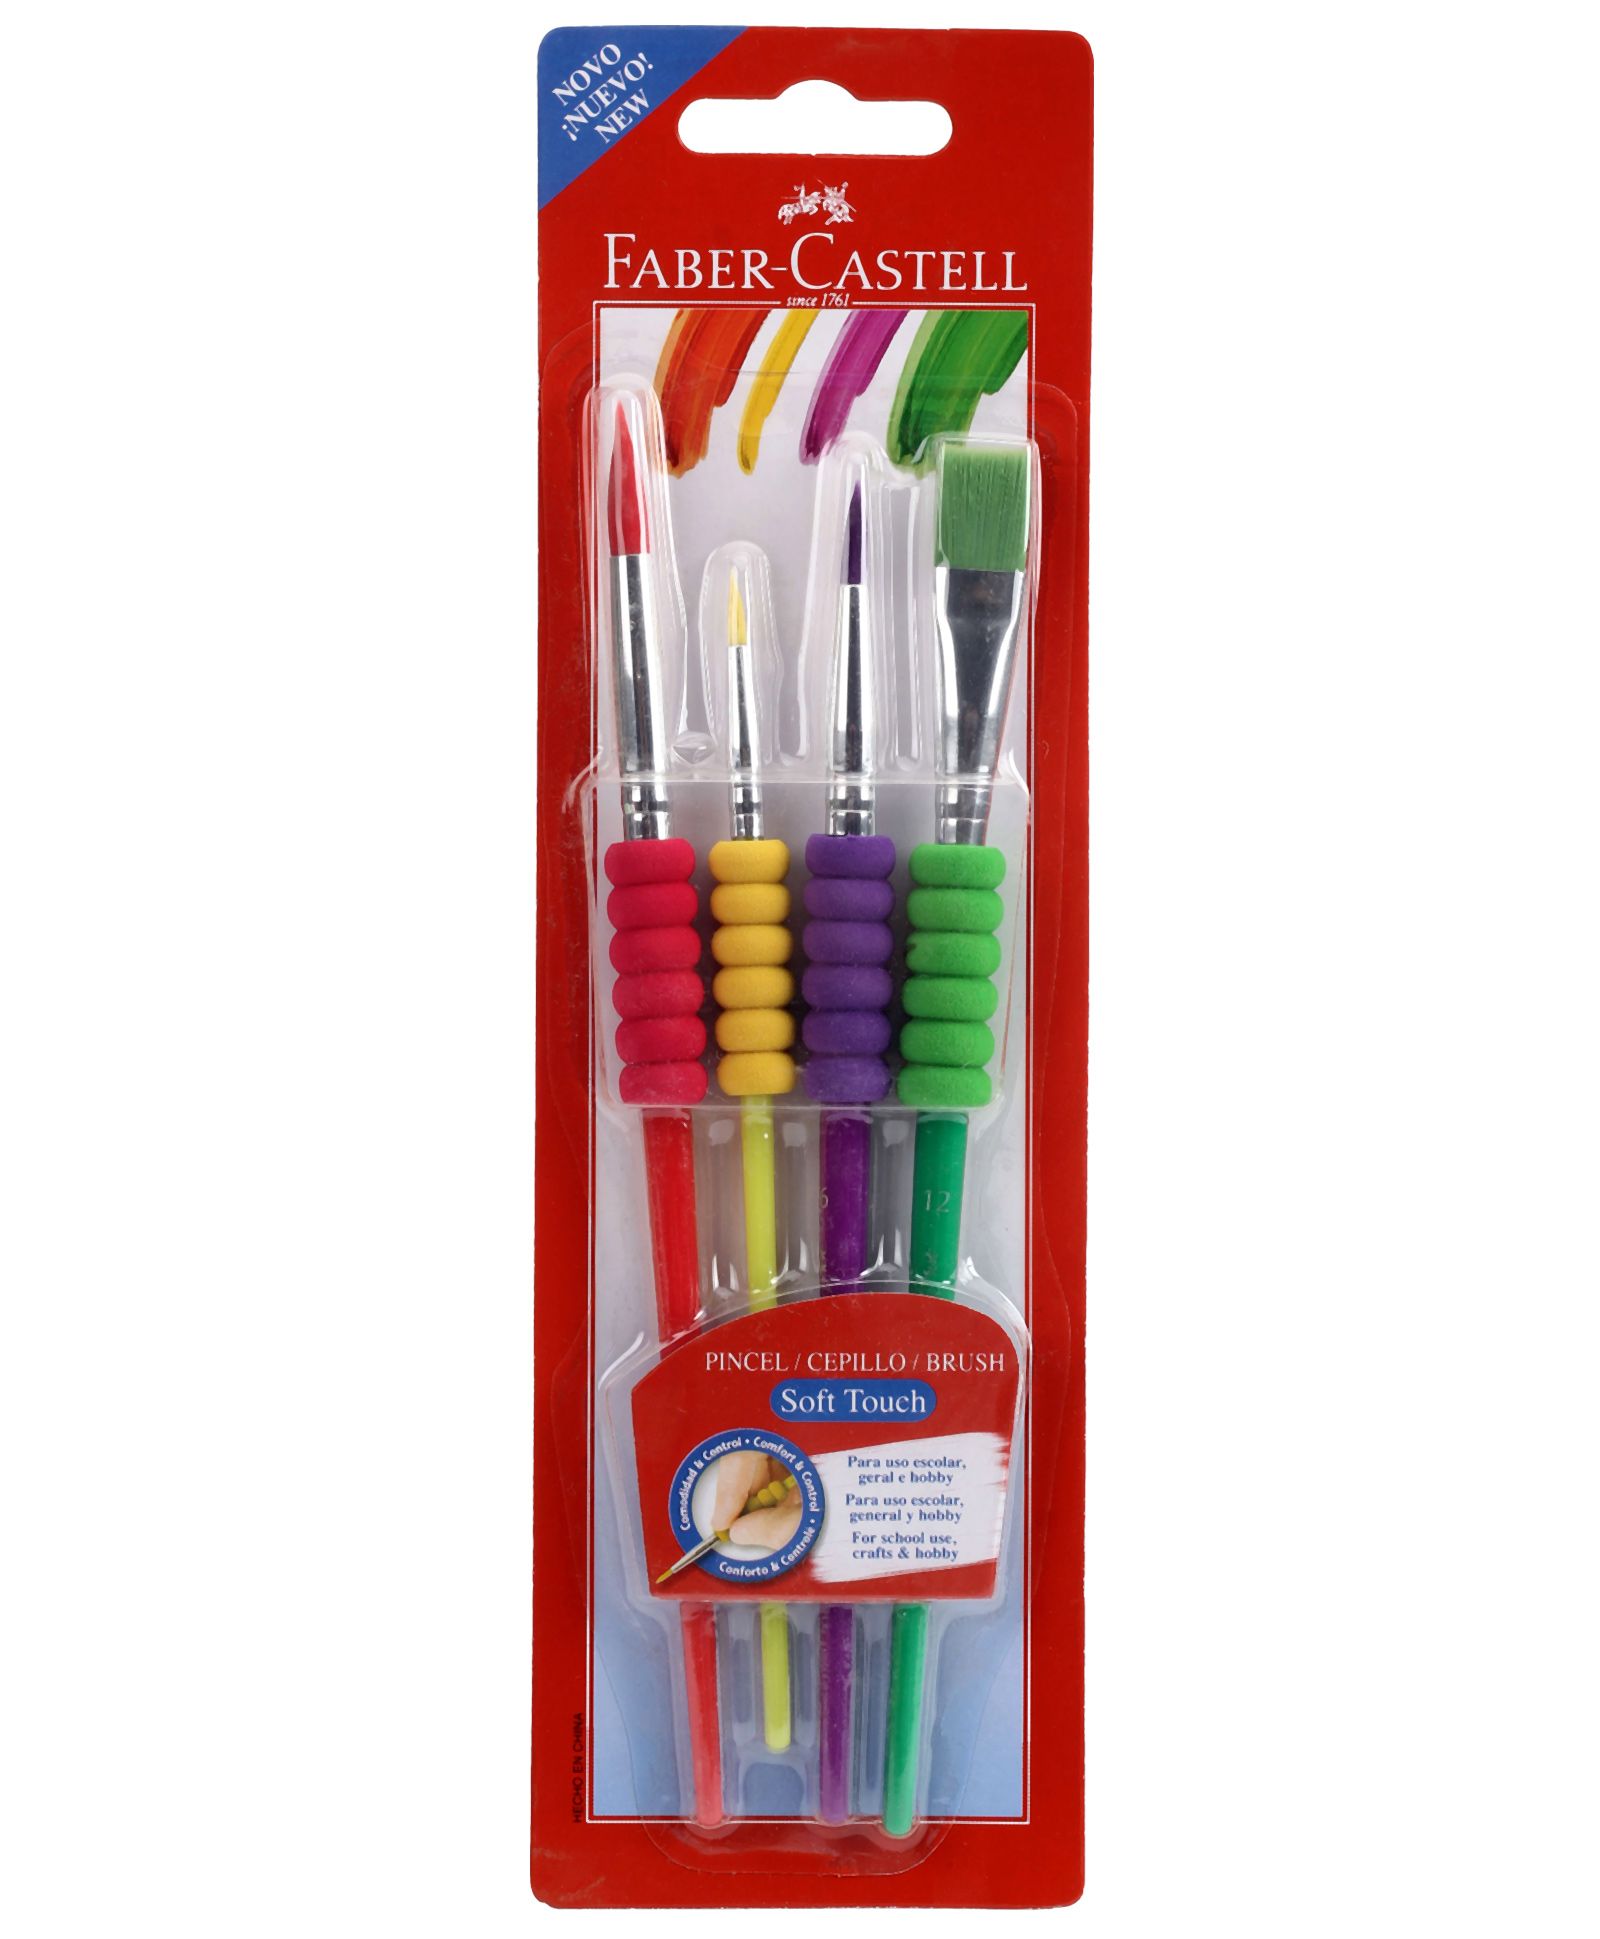 Faber Castell Soft Touch Brush set of 4